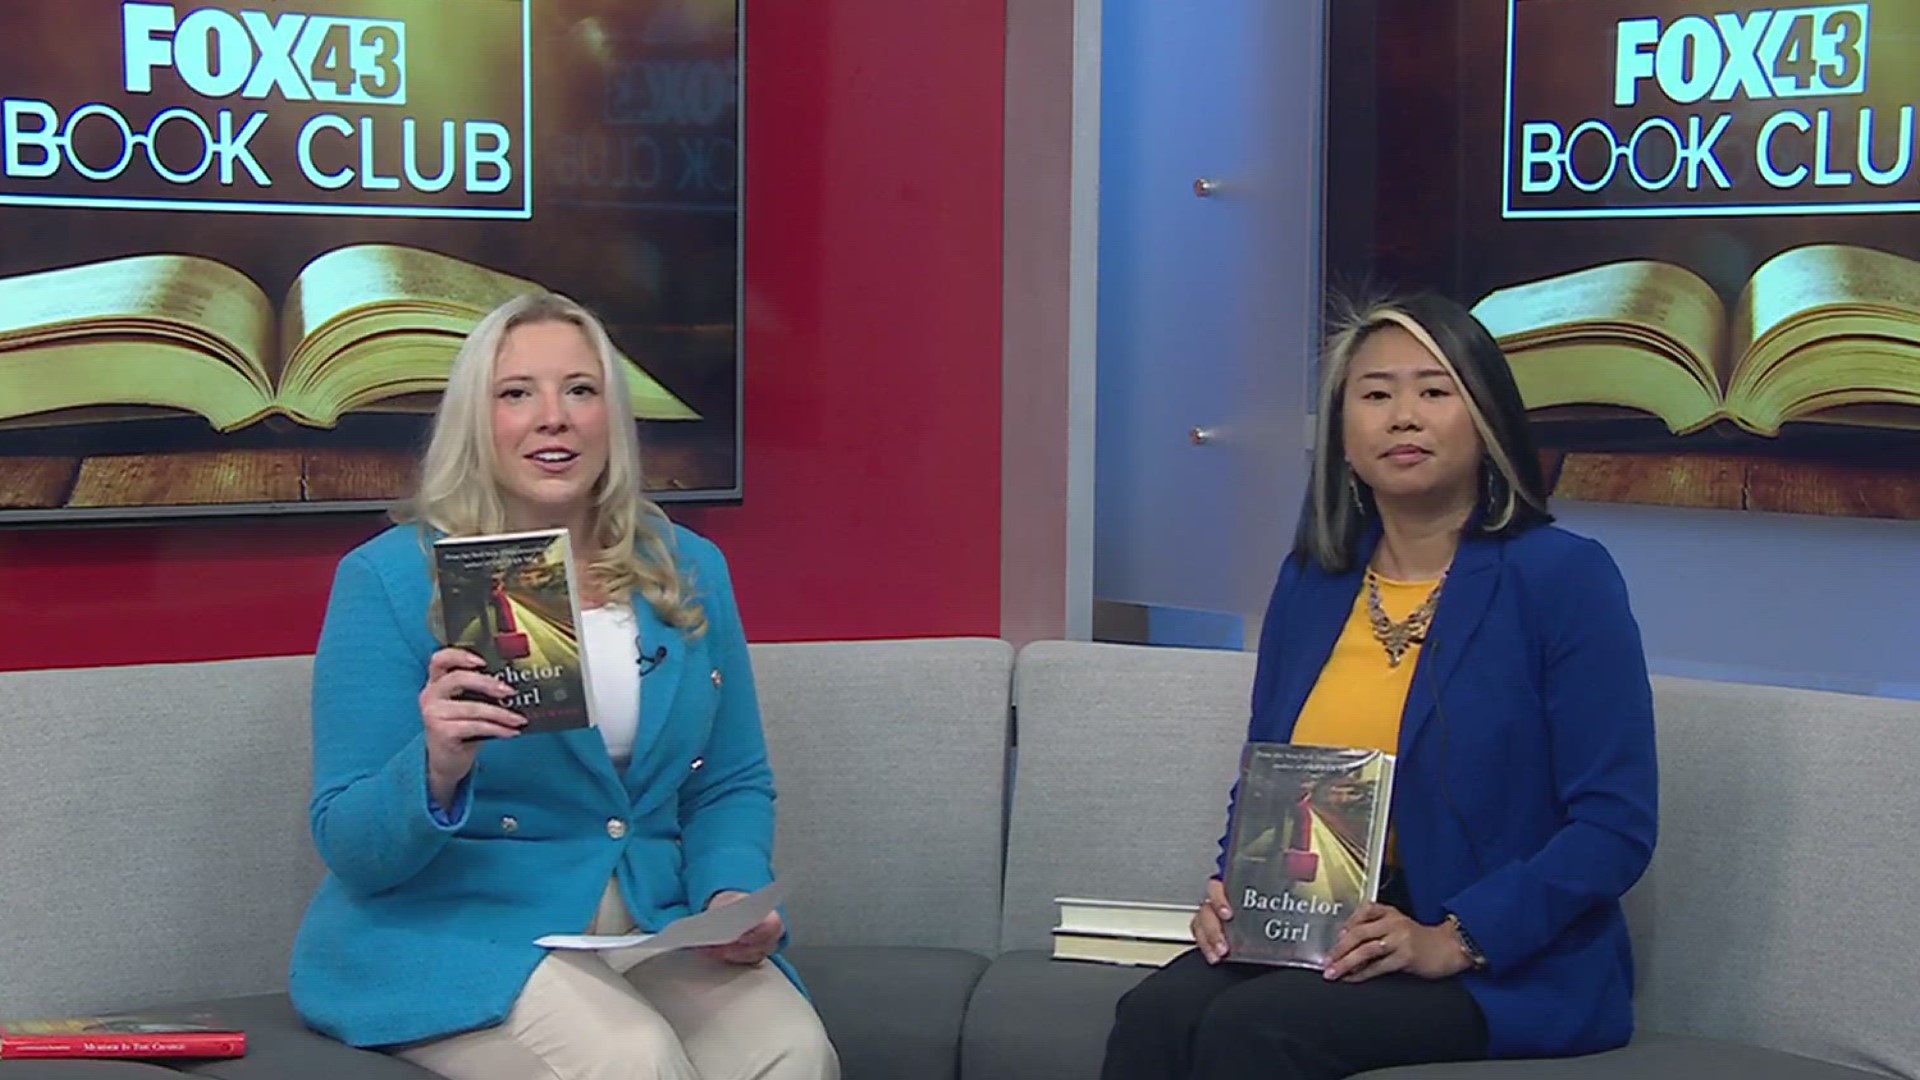 FOX43's Ally Debicki and East Shore Library's Maria Lagasca introduced the second book to be featured in the FOX43 Book Club. The discussion will be on April 25.